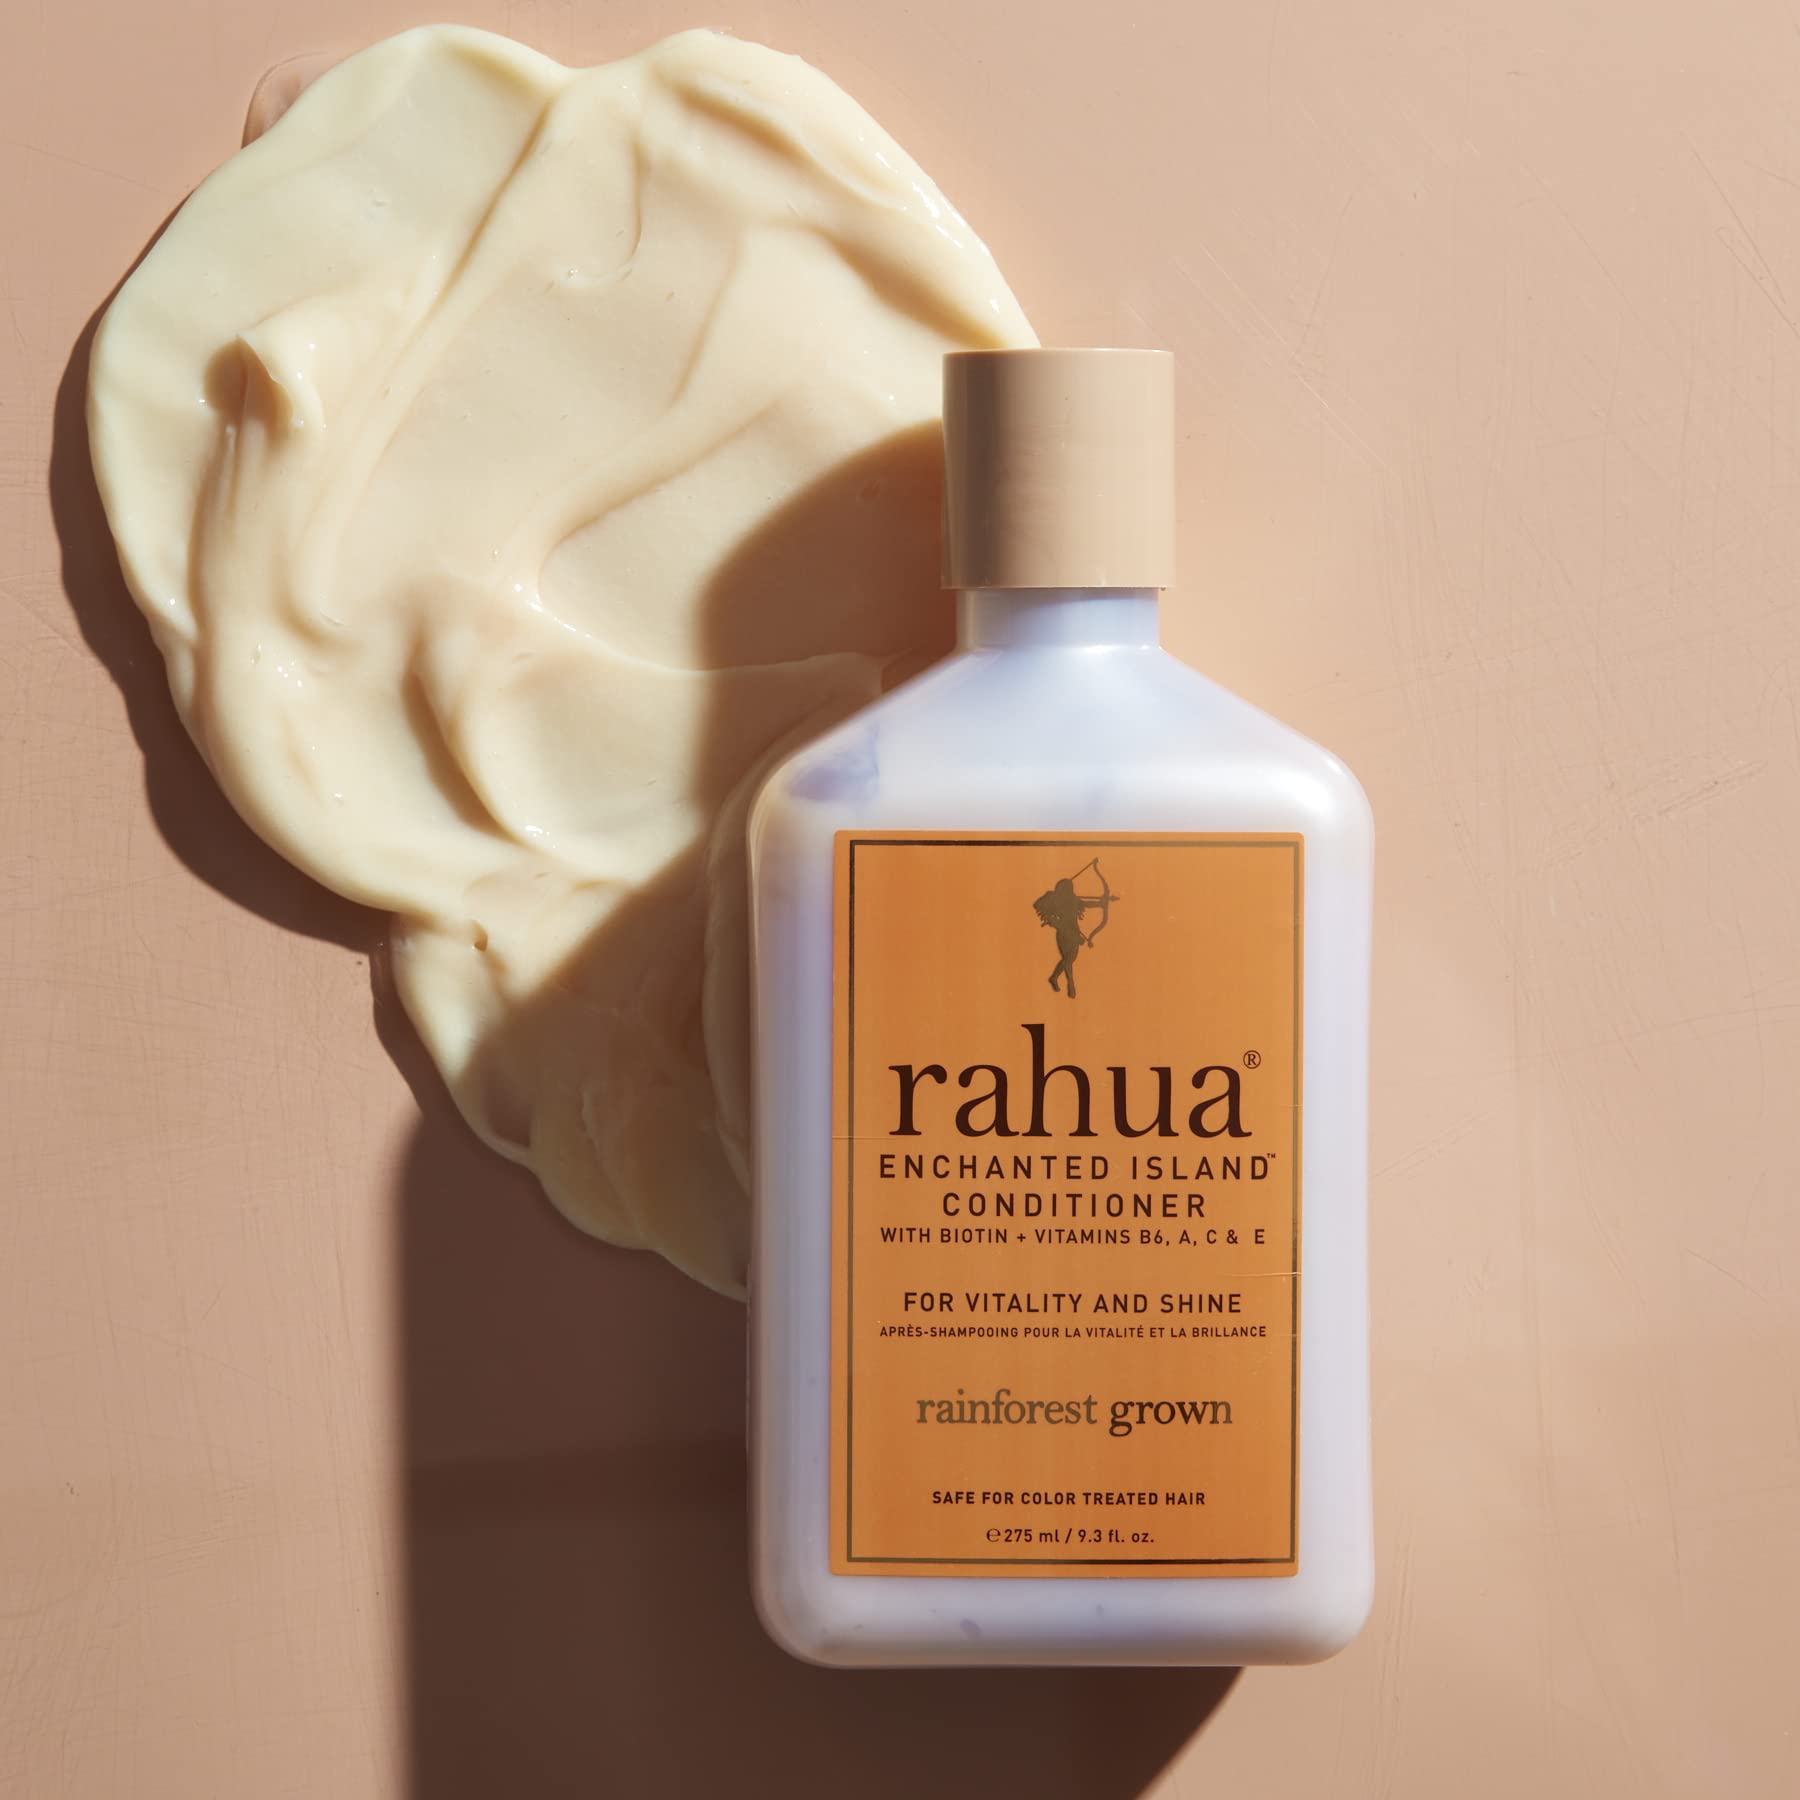 Rahua Enchanted Island Conditioner Refill 9.5 Fl Oz, Promotes Strength, Hair Growth and Gives Shine to All Hair Types, Nourishing Hair Conditioner for Men and Women